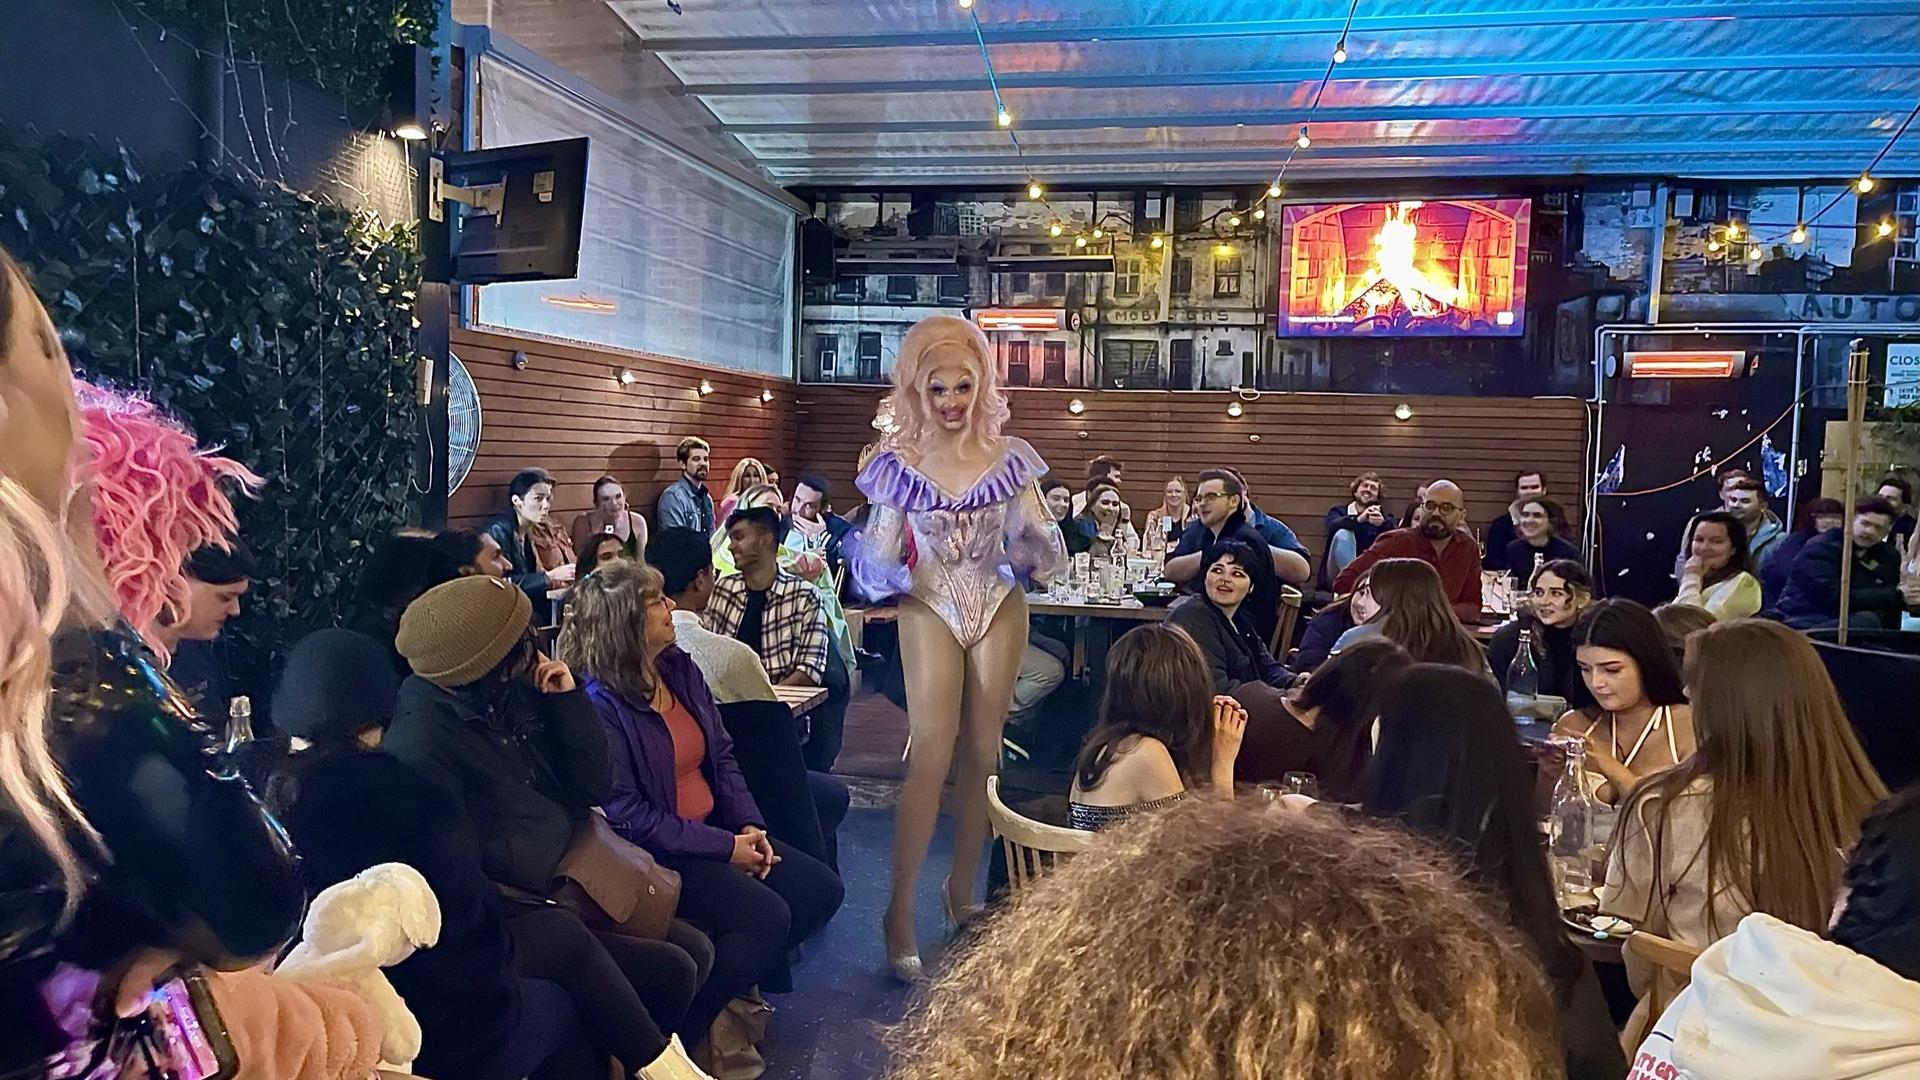 A drag queen will elaborate blonde wig performs to the crowd